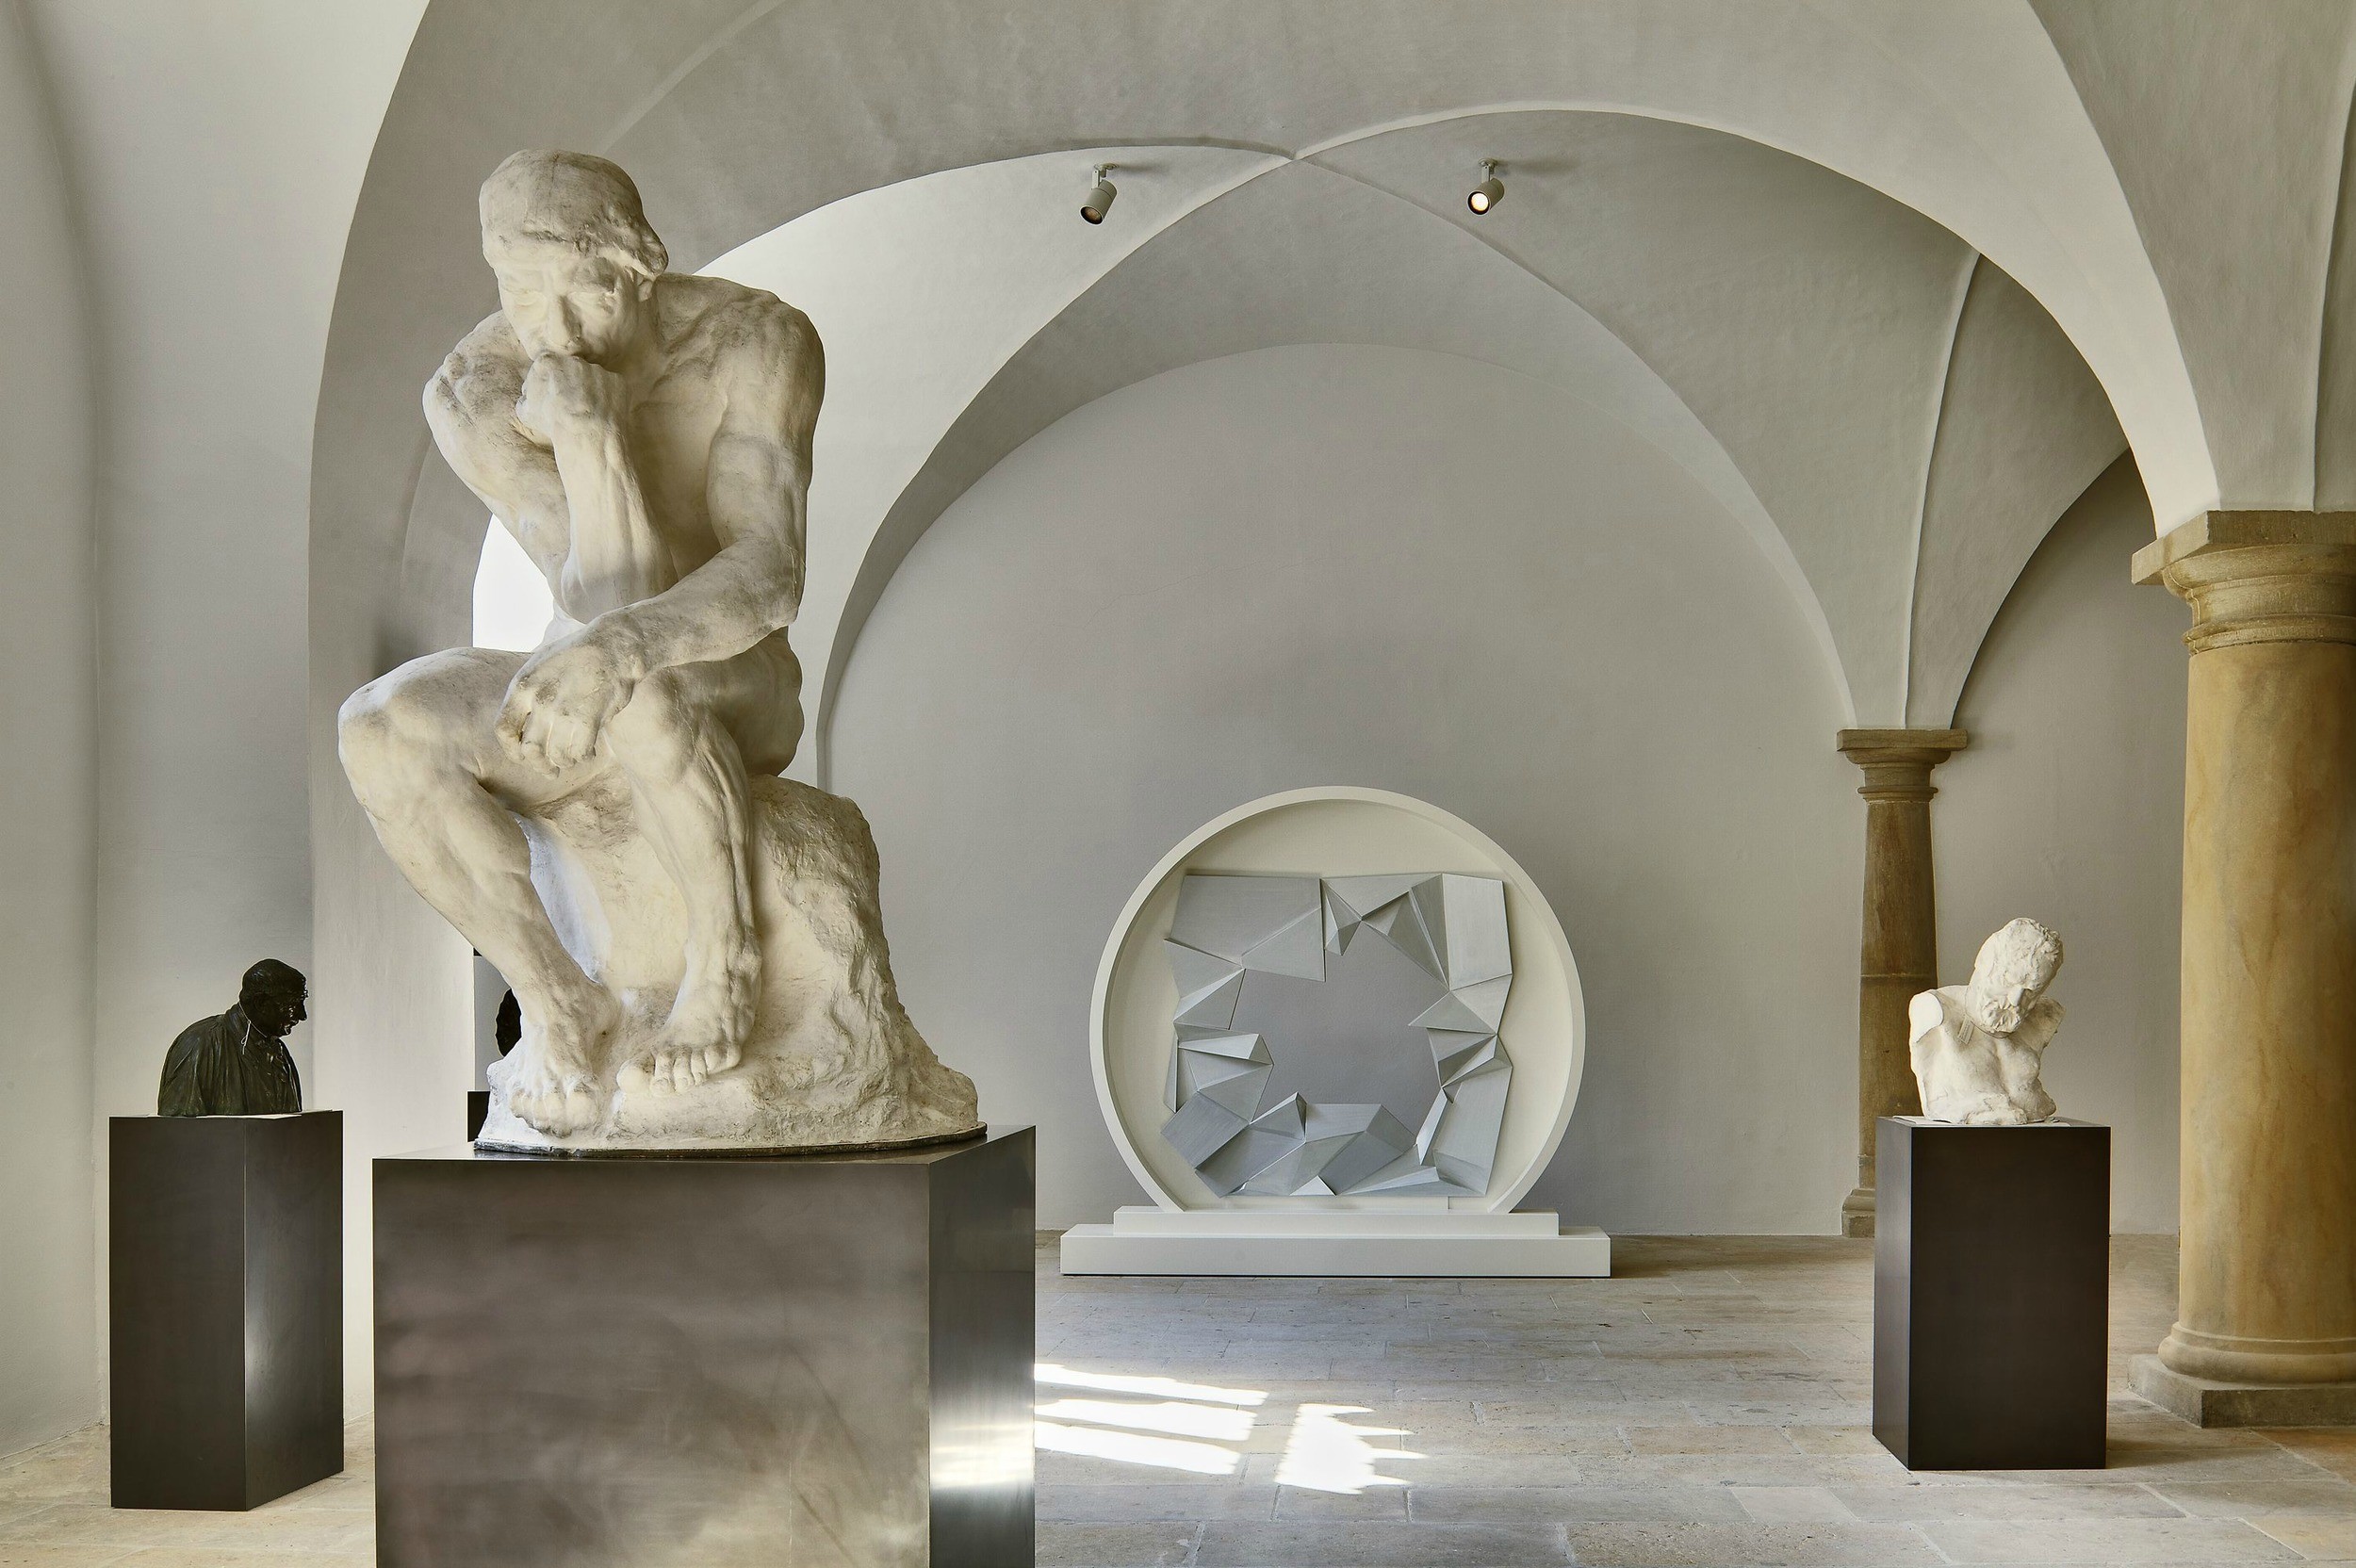 Sculpture Hall at Albertinum Dresden with The Thinker by Rodin Photo David Brandt